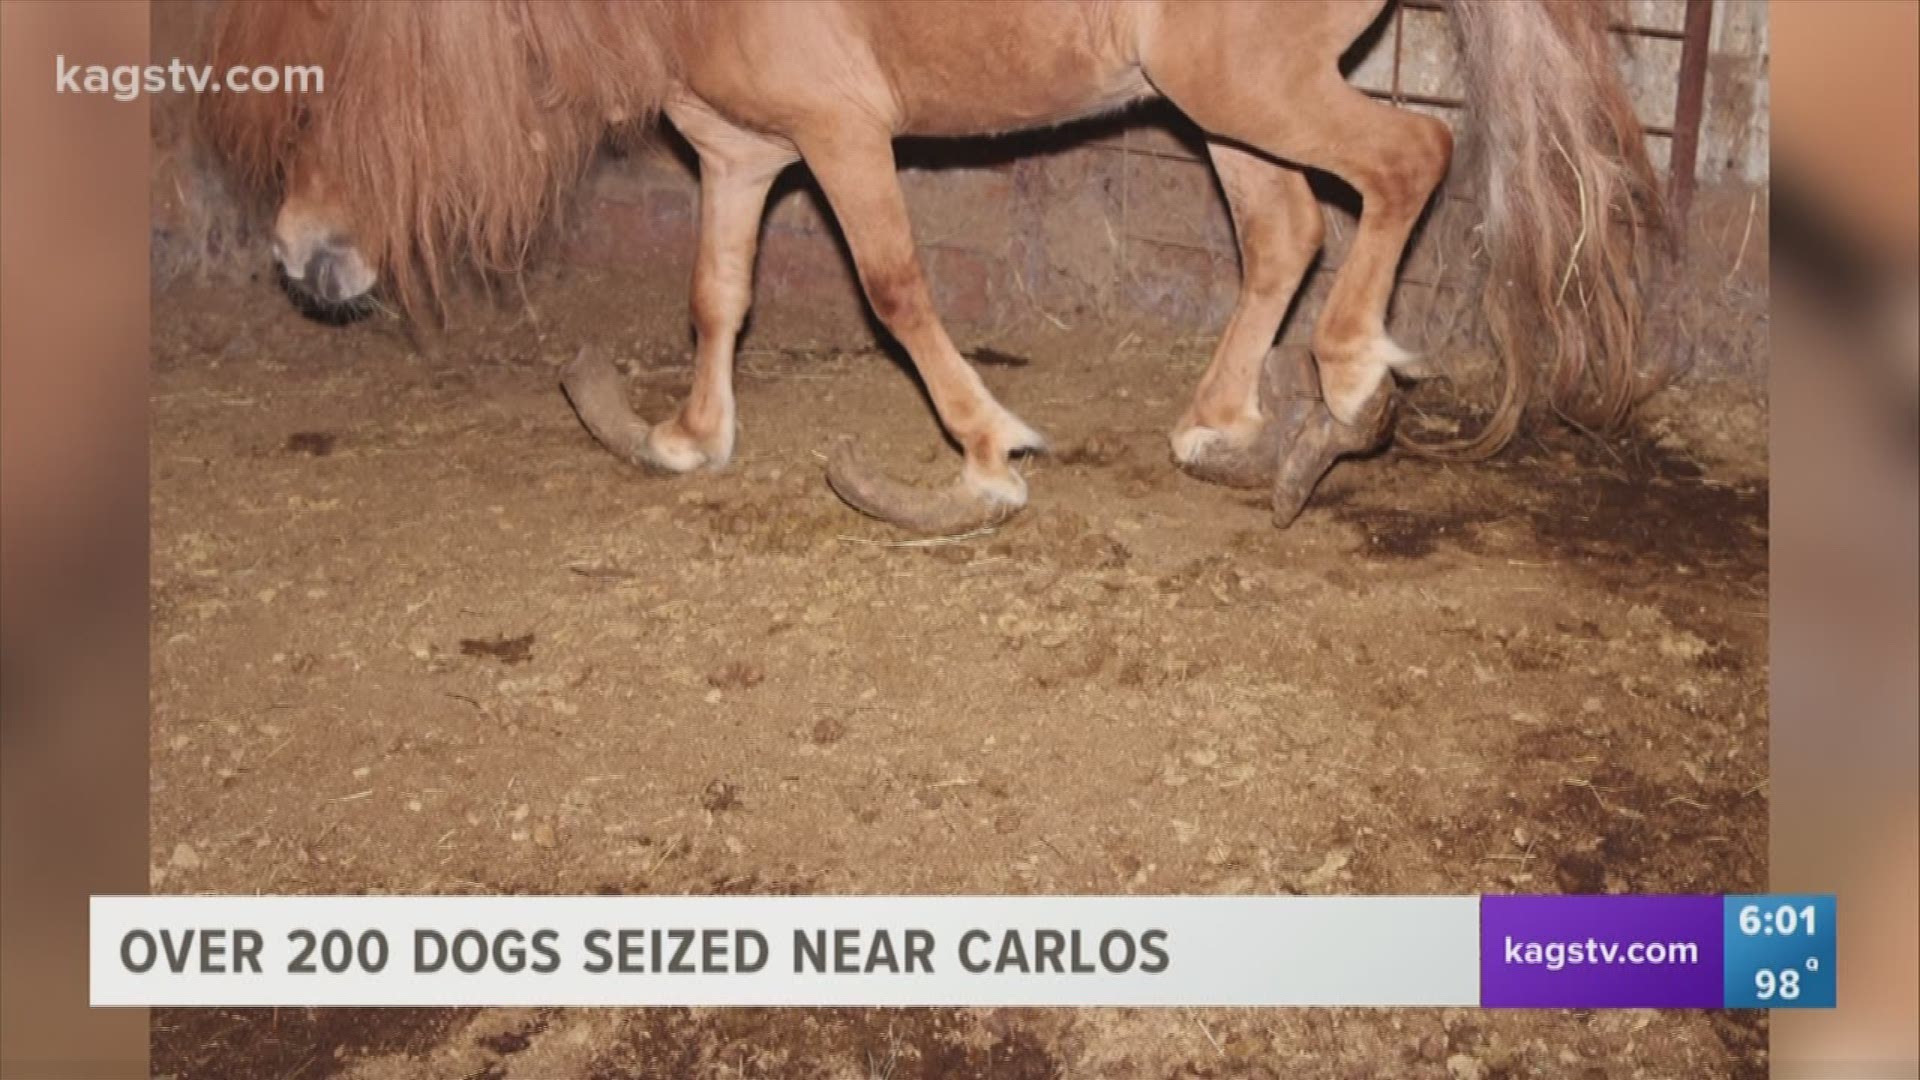 Almost 300 hundred animals, living in horrible conditions, were seized on Wednesday